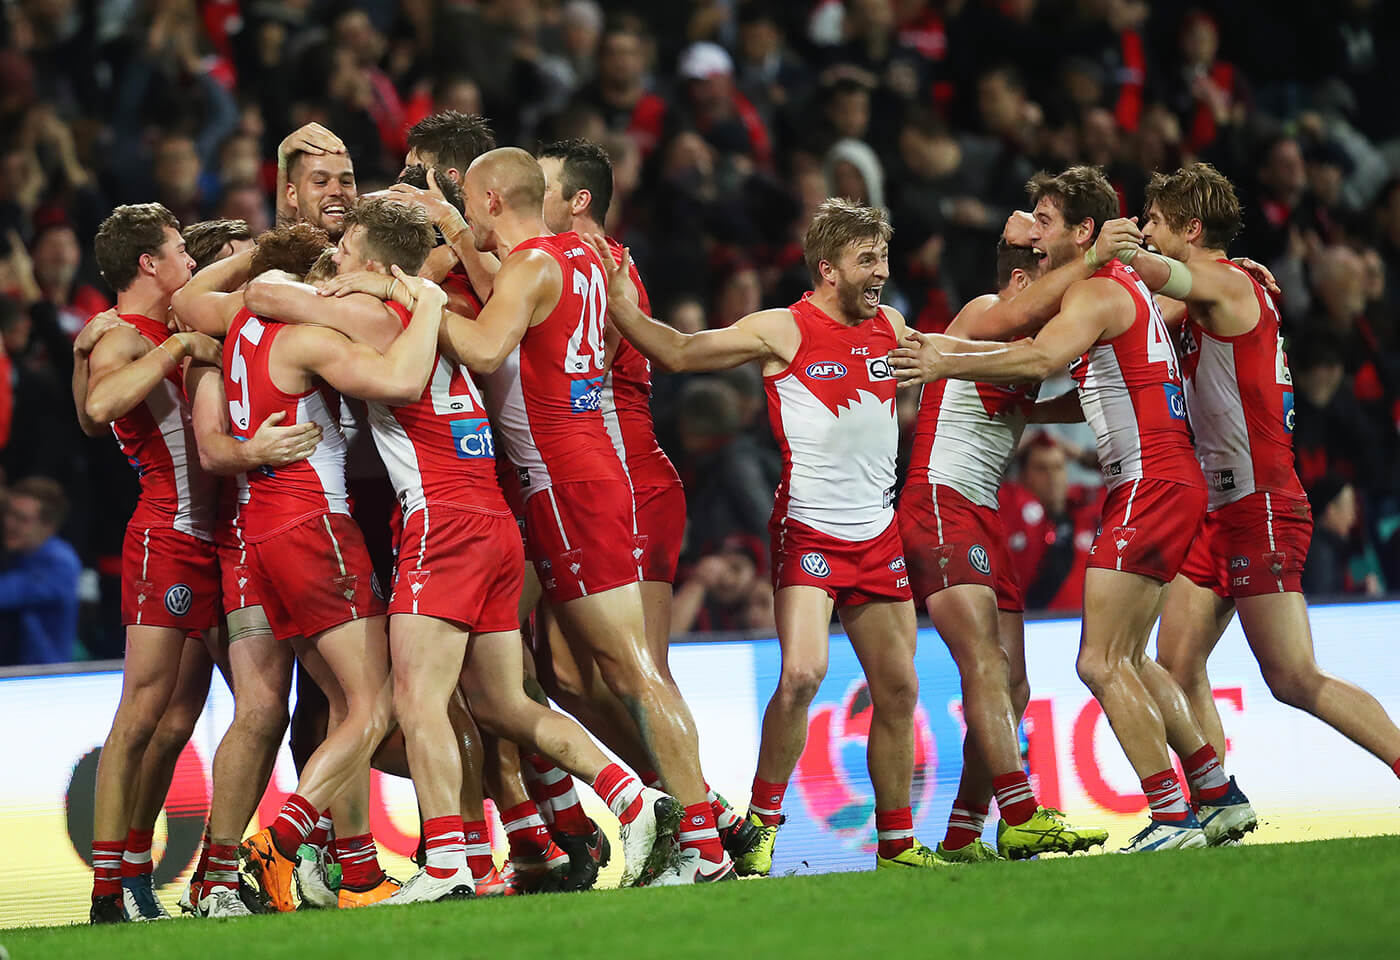 Swans vs Bombers image taken by Phil Hillyard